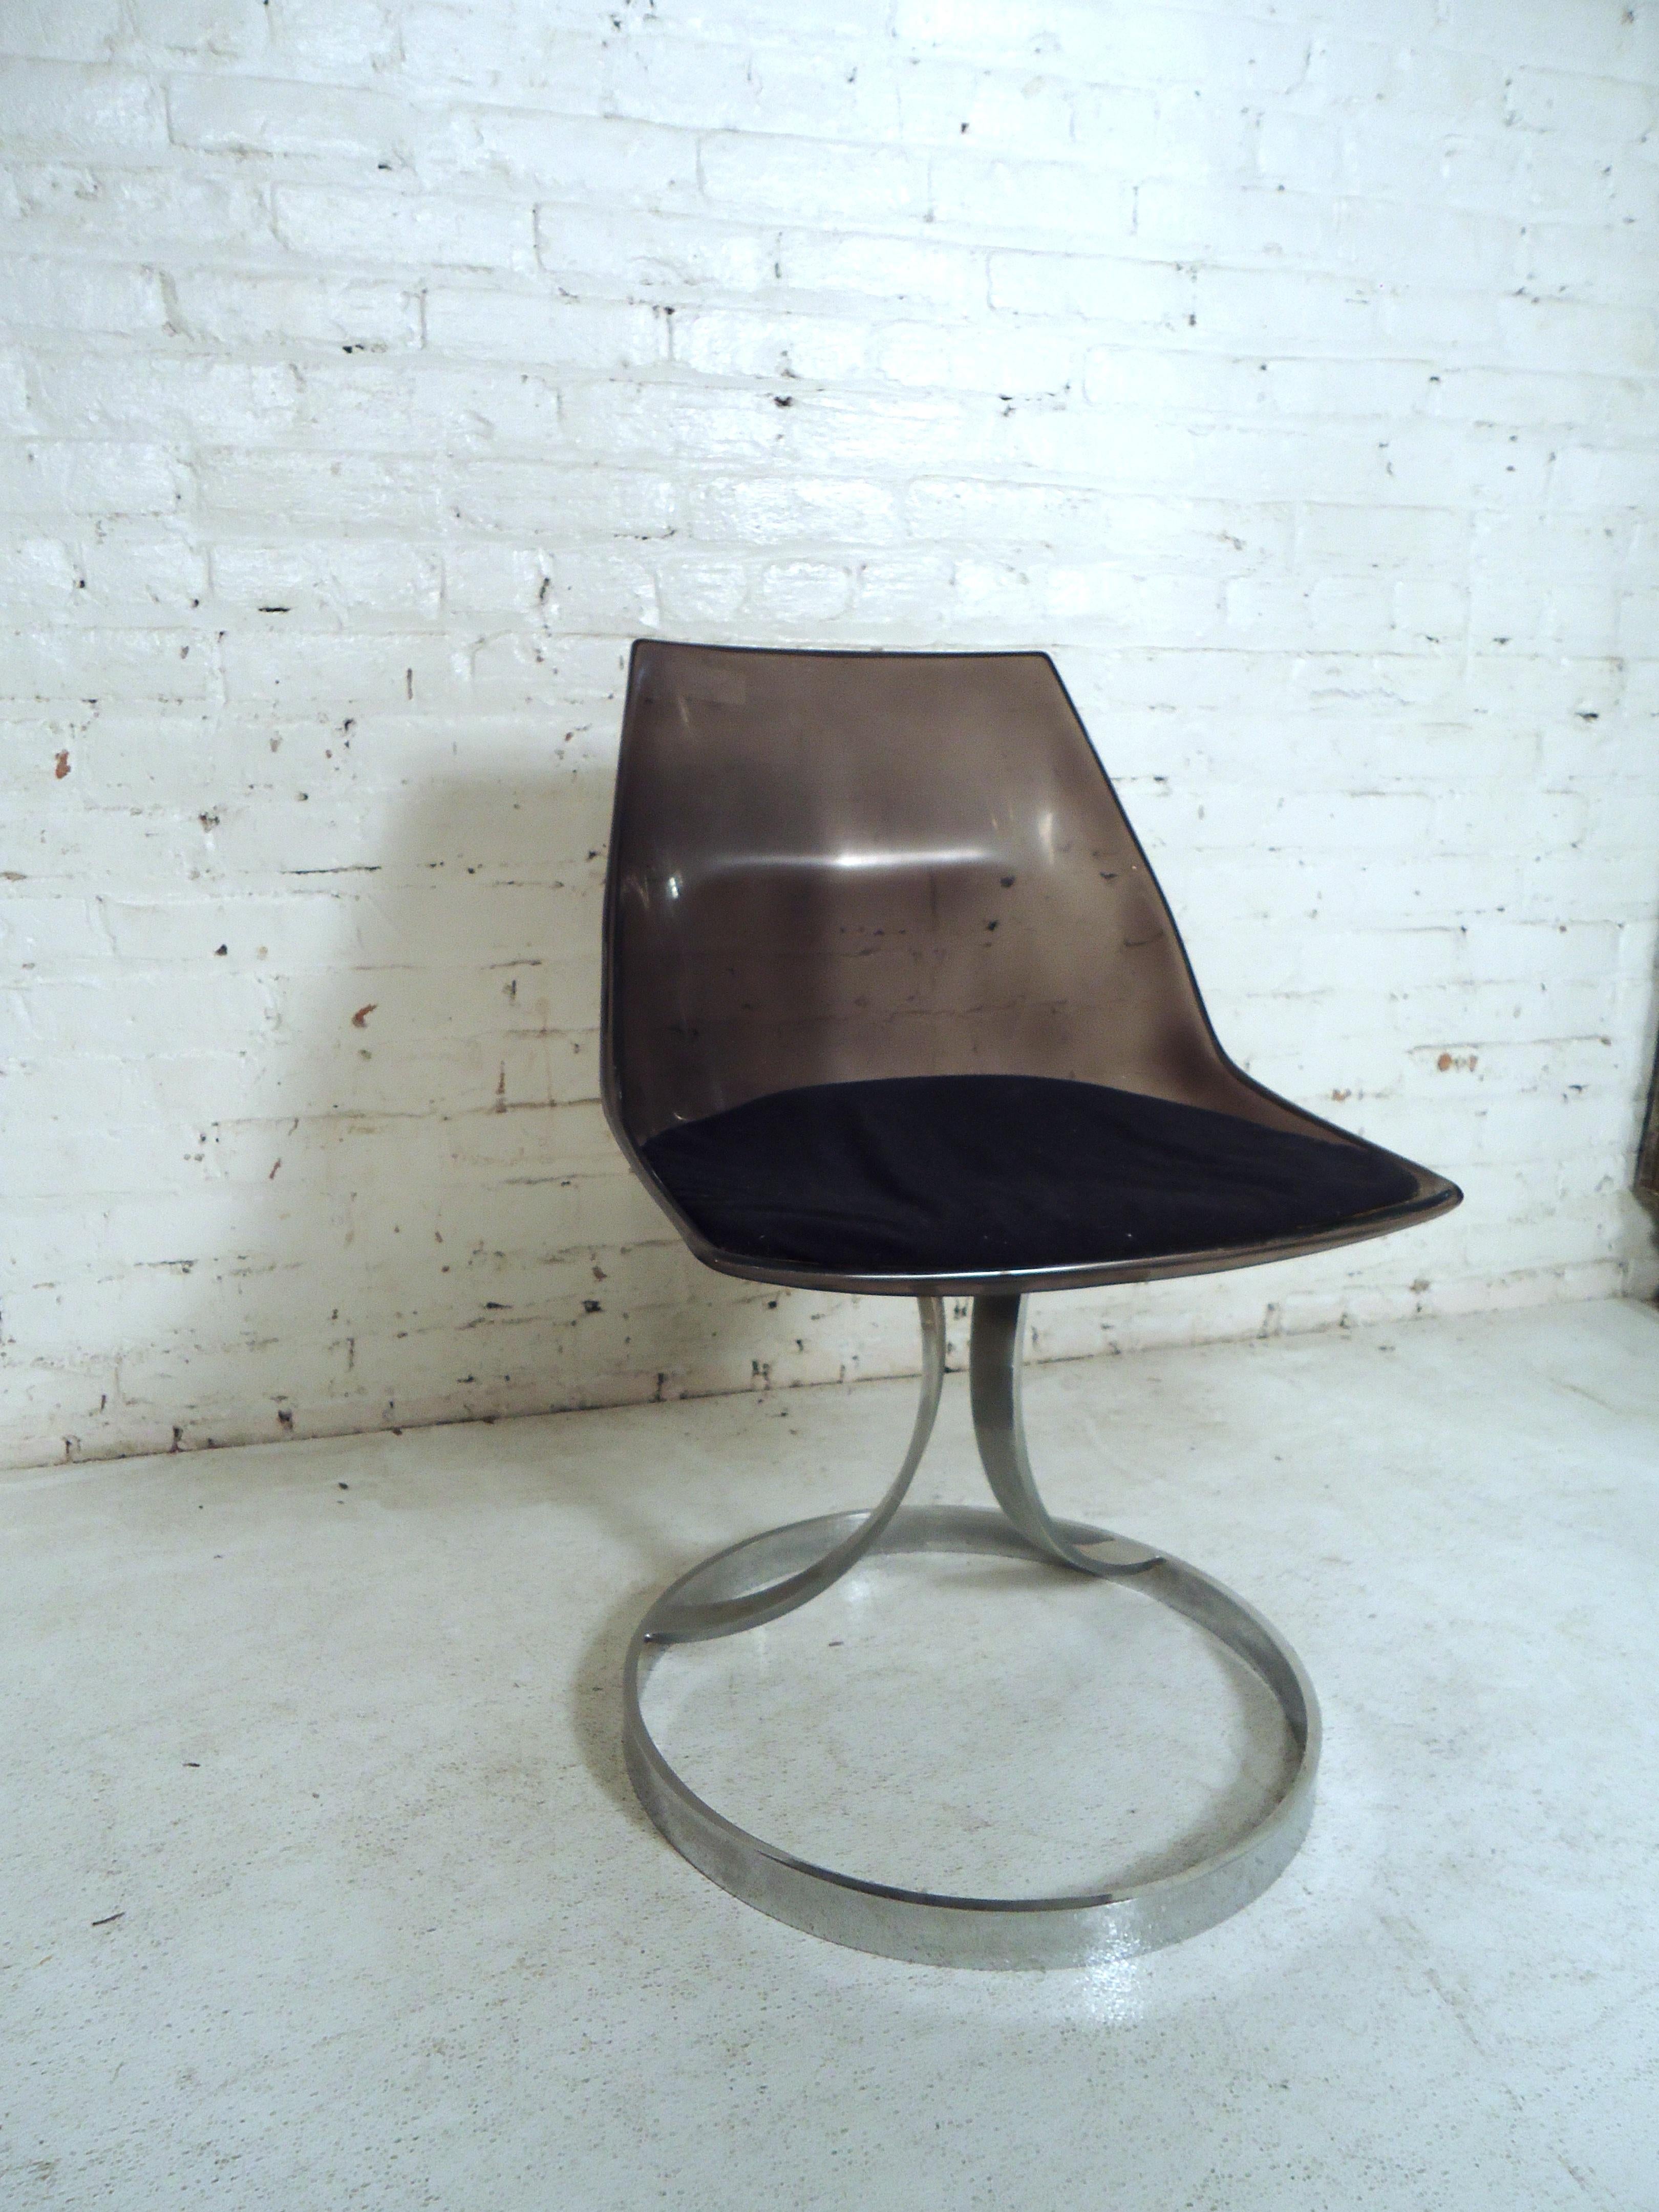 Mid-20th Century Vintage Modern Italian Lucite Chair For Sale